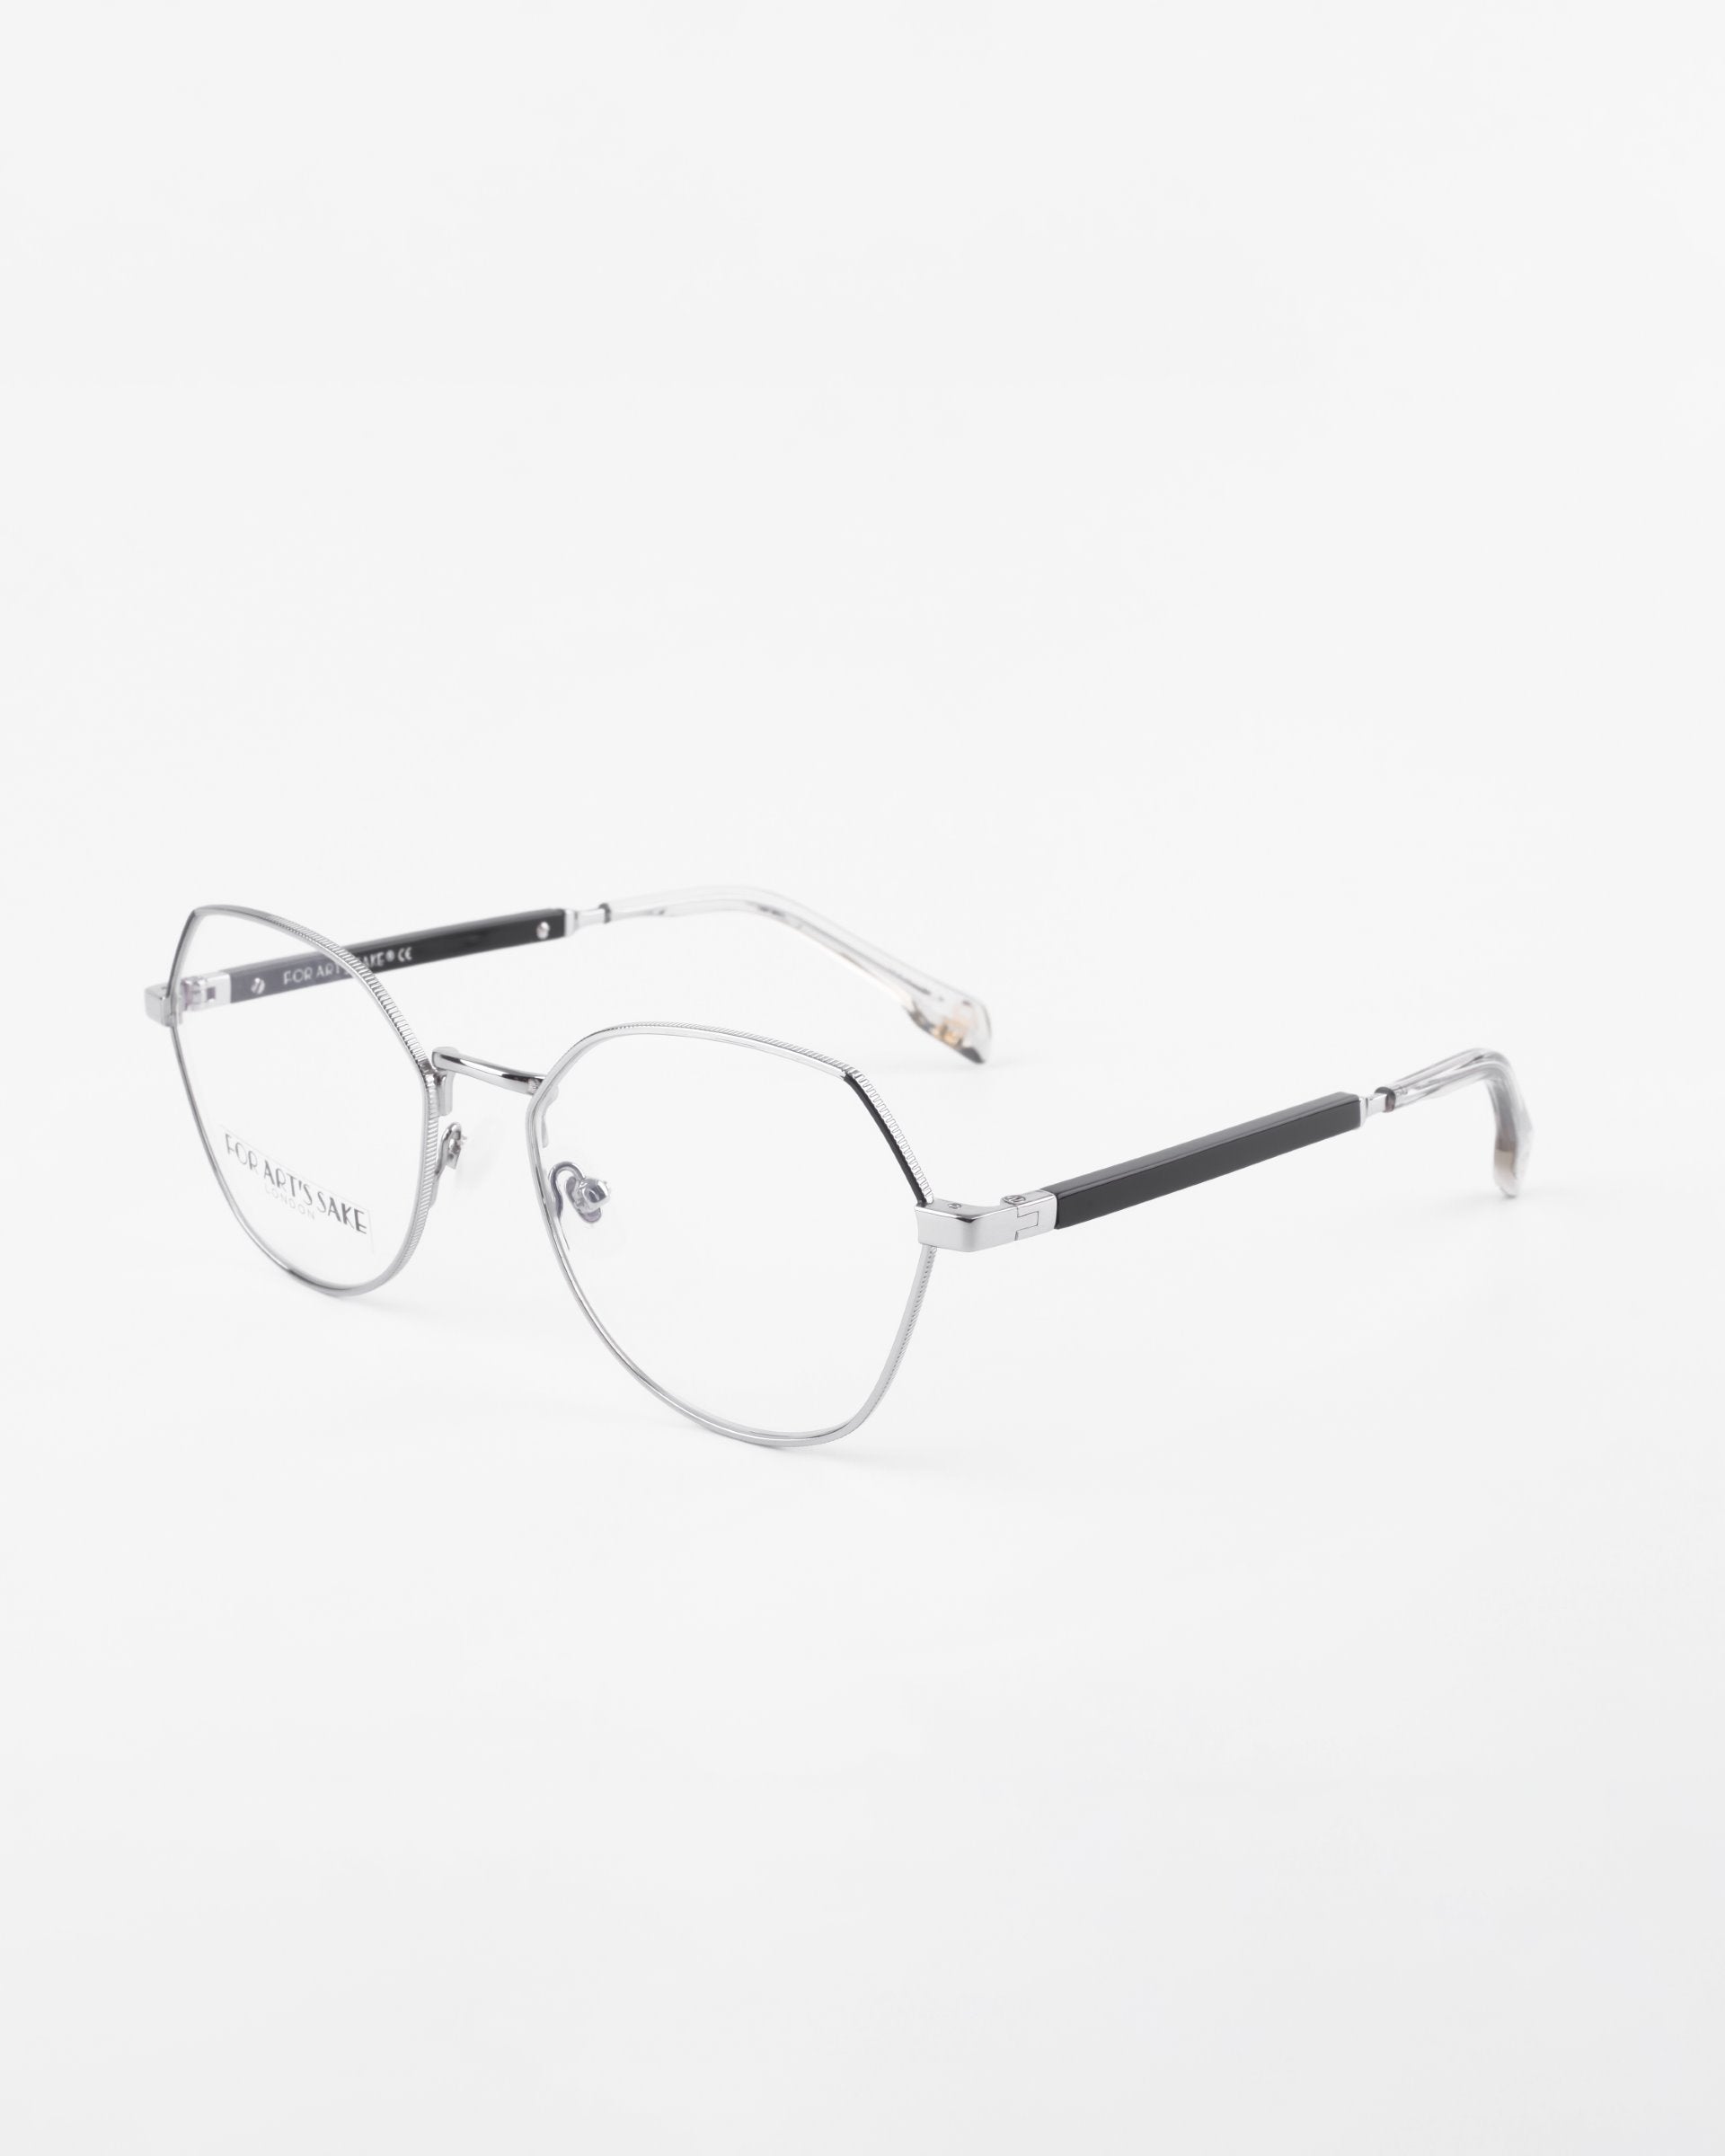 A pair of Orchard eyeglasses by For Art&#39;s Sake® with a sleek, modern design, featuring silver metal frames and thin black arms. The oval-shaped, rimless lenses are prescription lenses with a blue light filter. The Orchard glasses are set against a plain white background.